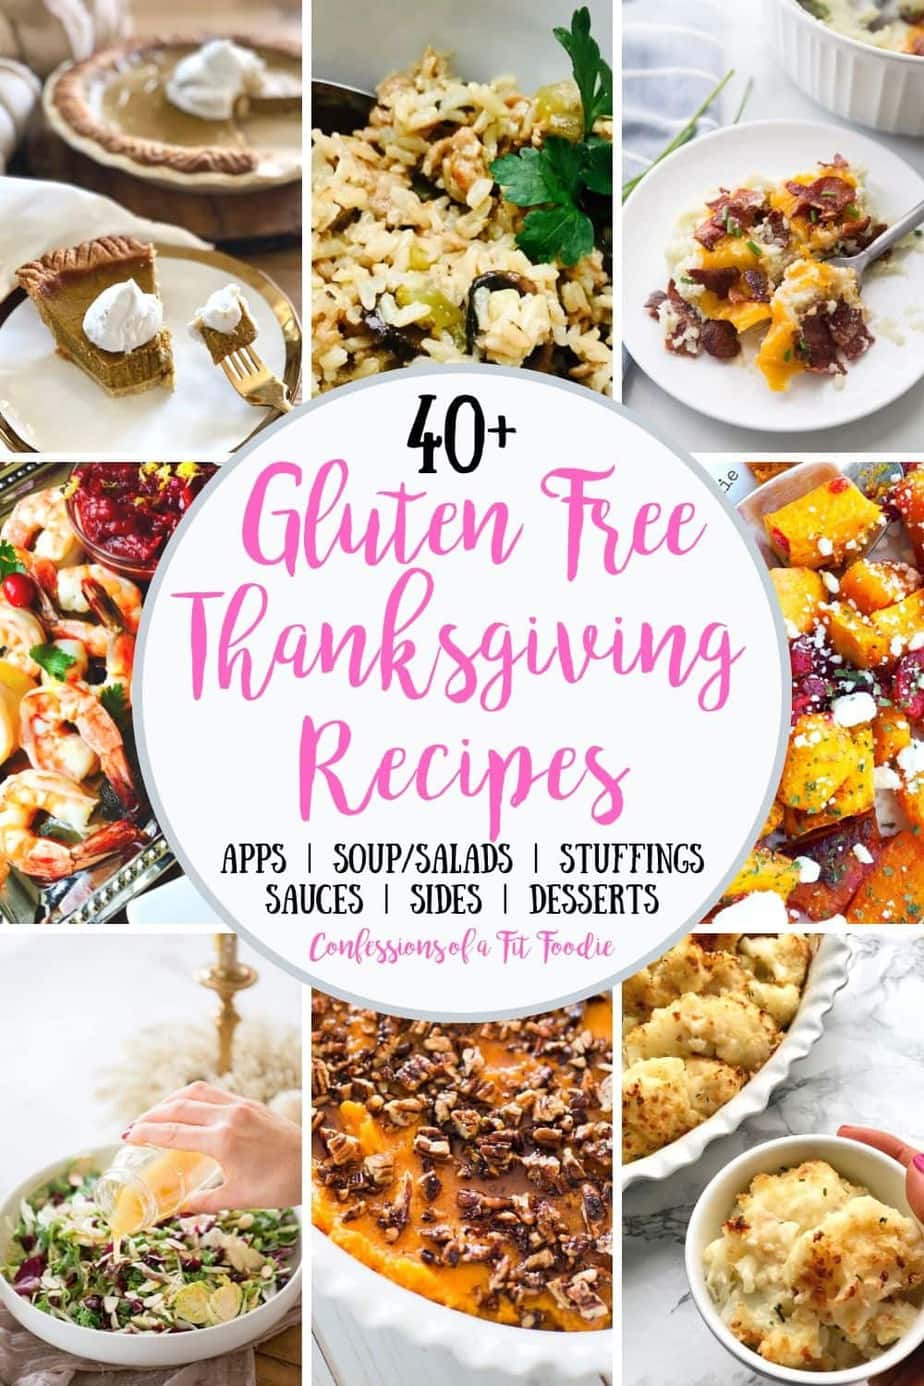 60+ Gluten Free Thanksgiving Recipes - Confessions of a Fit Foodie